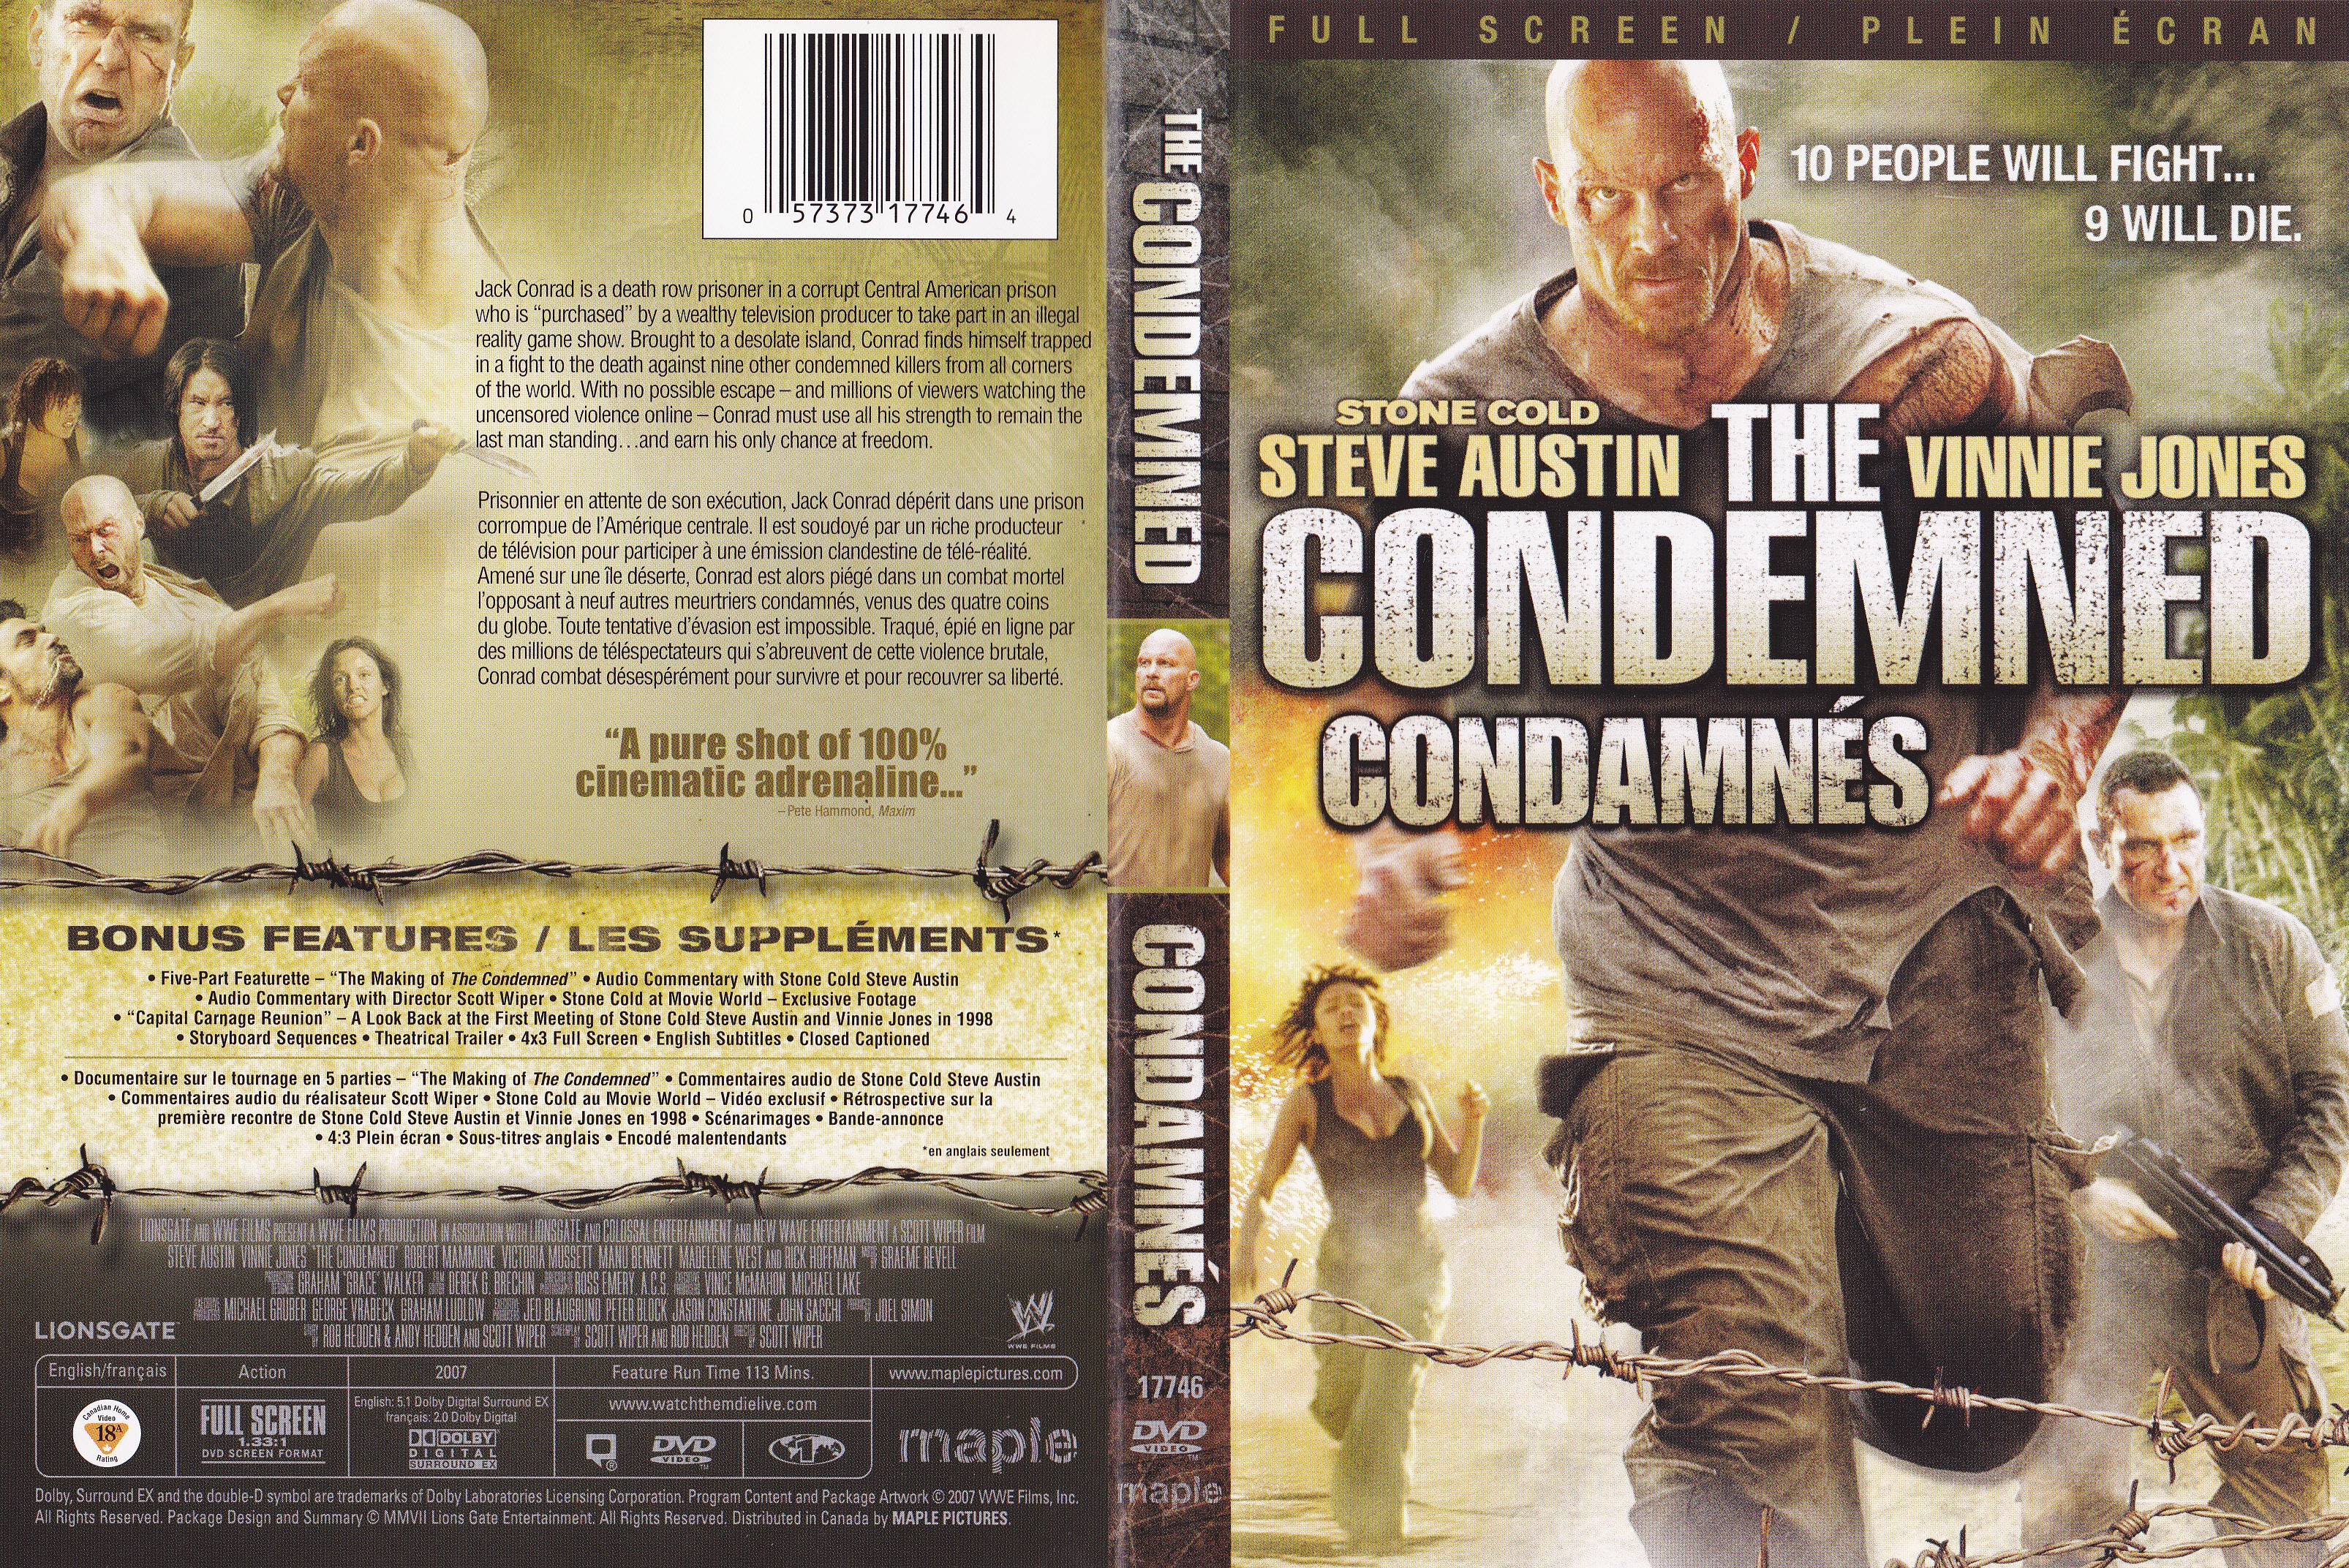 Jaquette DVD The condamned - Condamns (Canadienne)